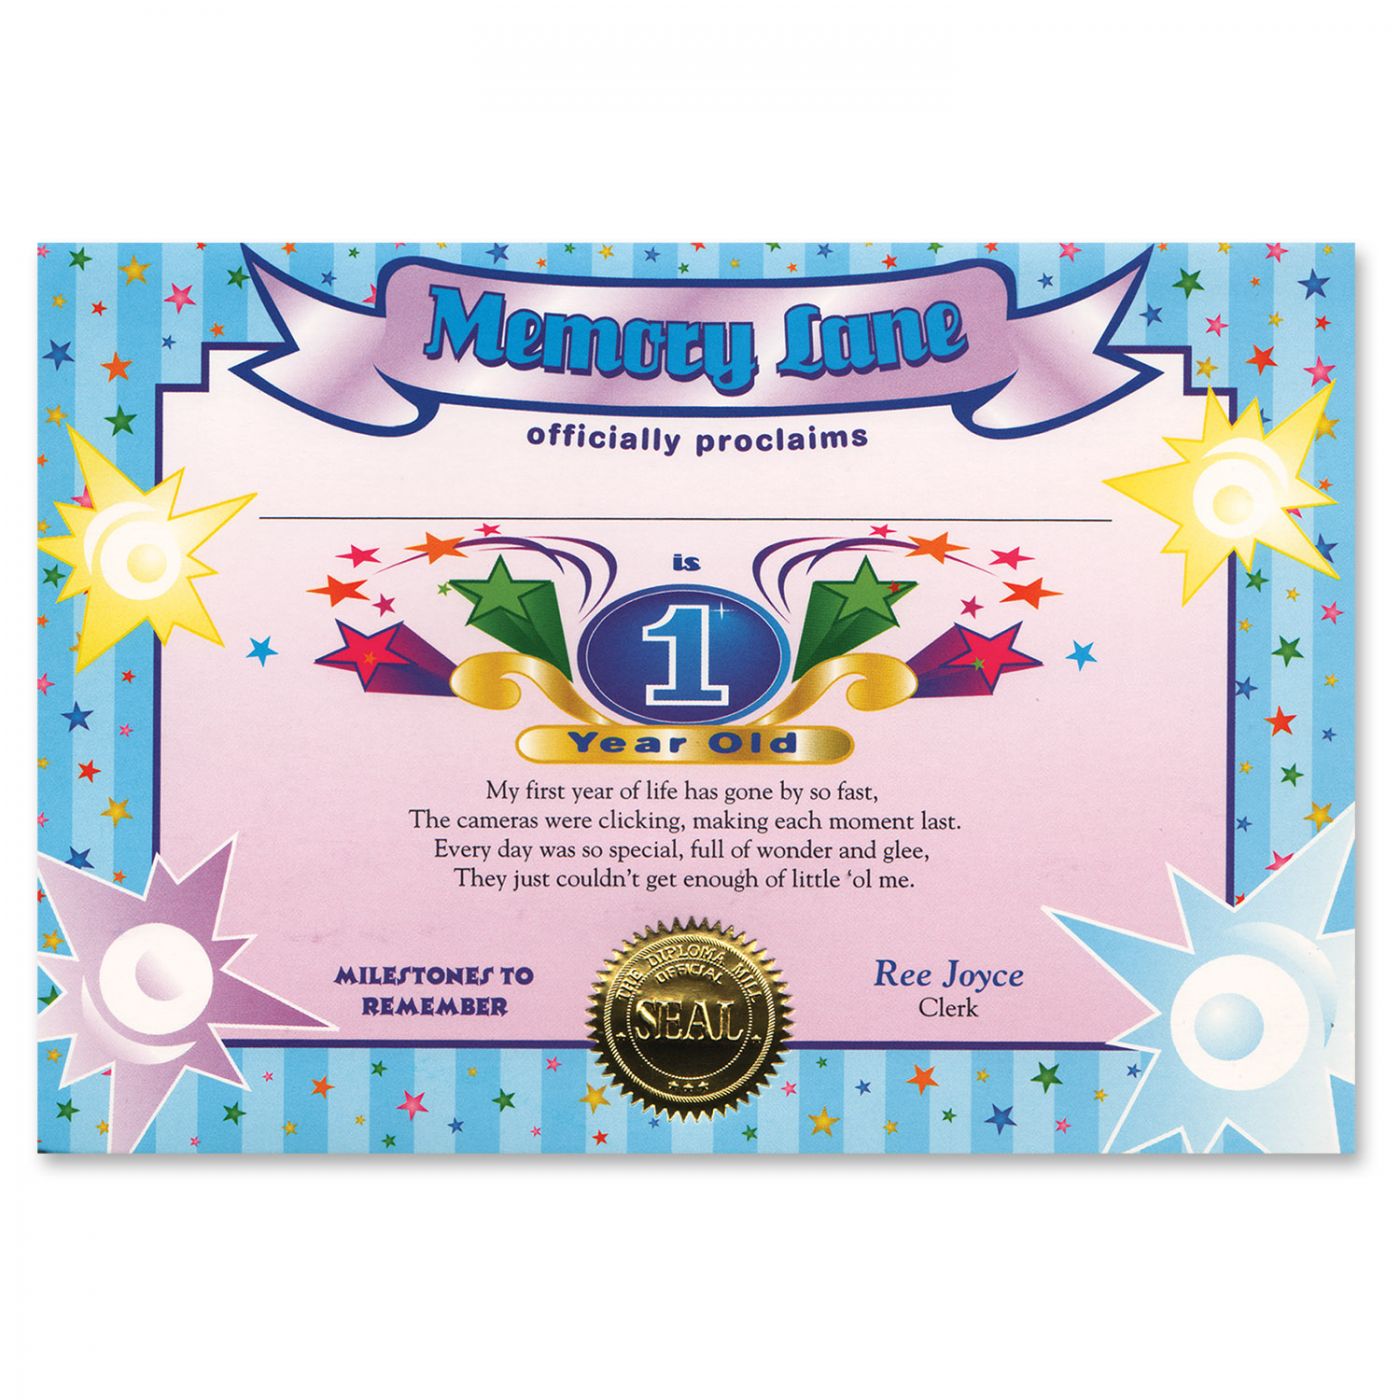 1 Year Old  (Boy) Certificate (6) image